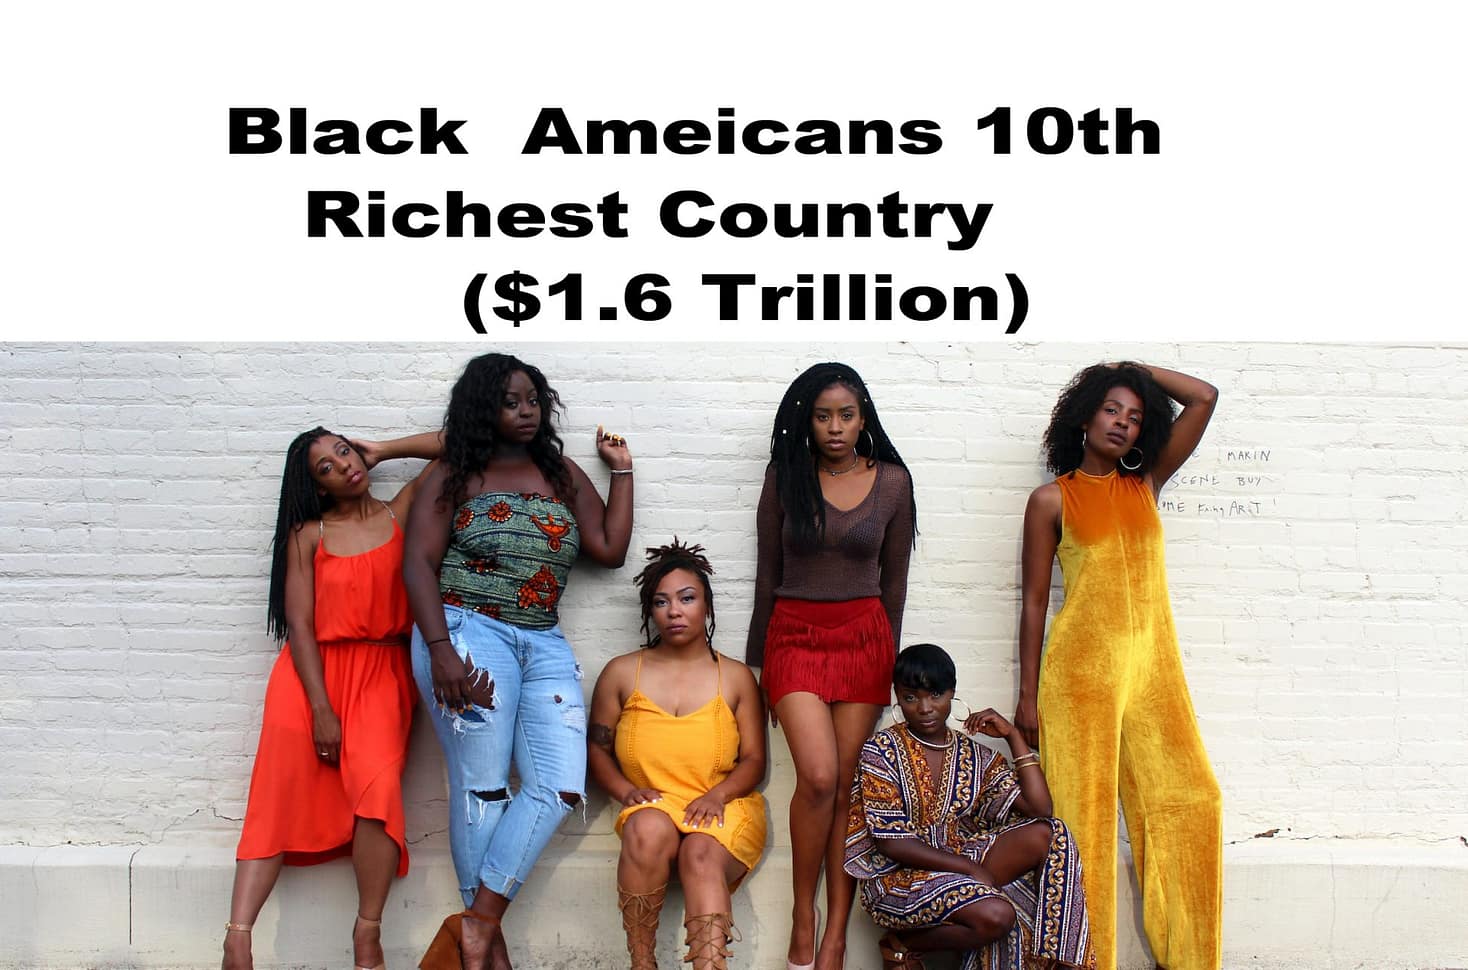 Black Americans Have More Spending Power Than Australia or Spain